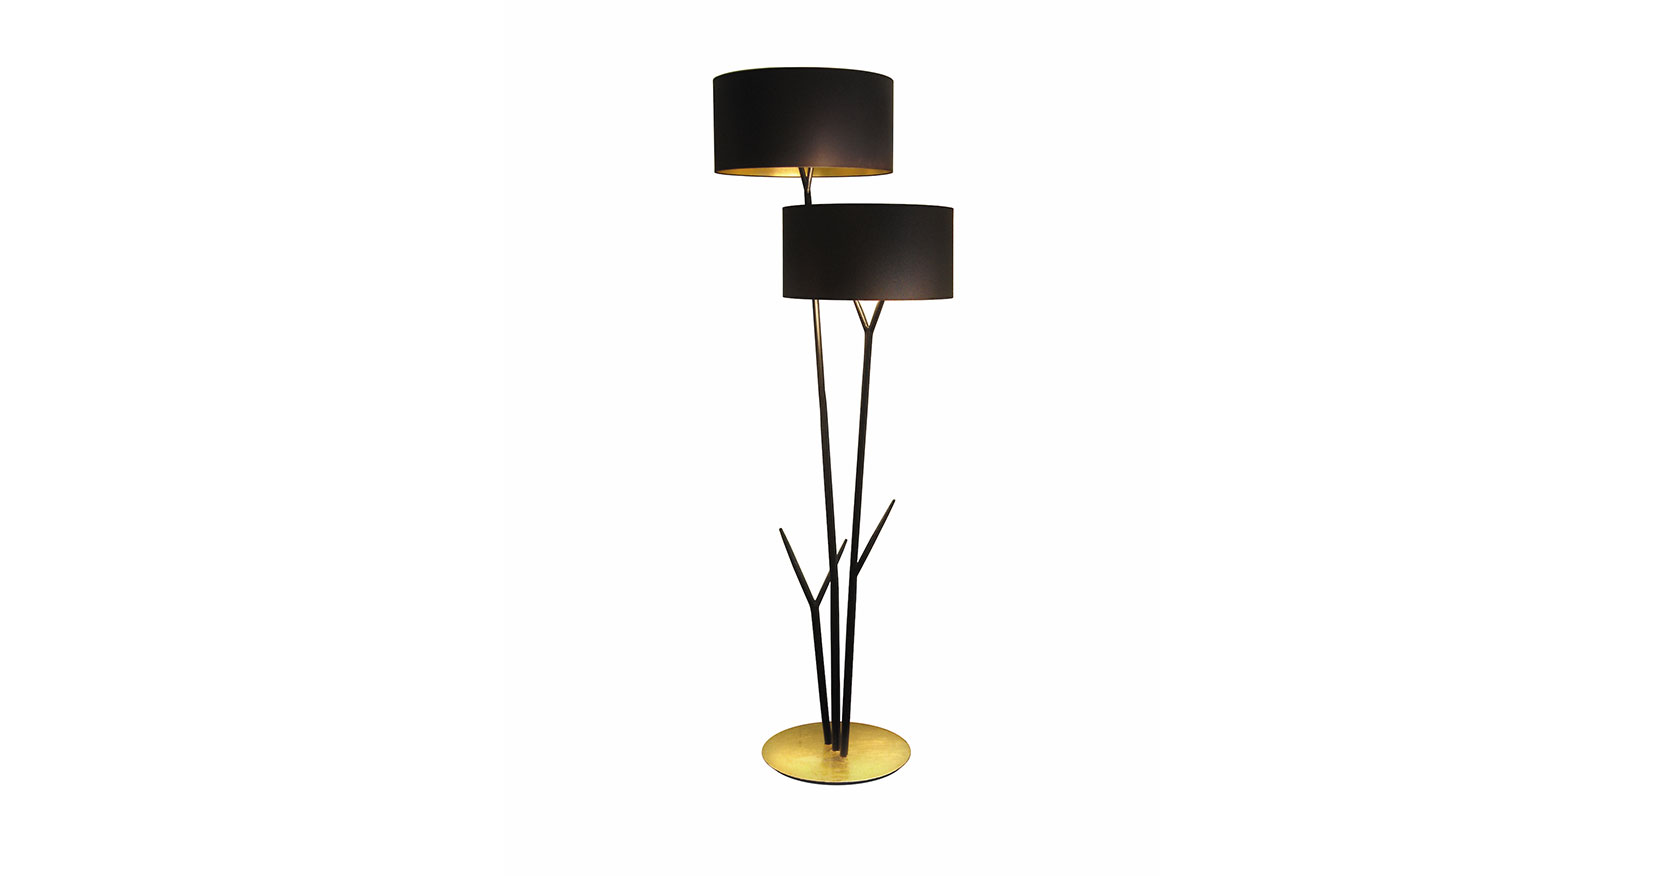 Eric Robin, spectacular sculptural floor lamp with 2 stems like branches in black wrought iron which start from a round golden base, a black oval lampshade per stem